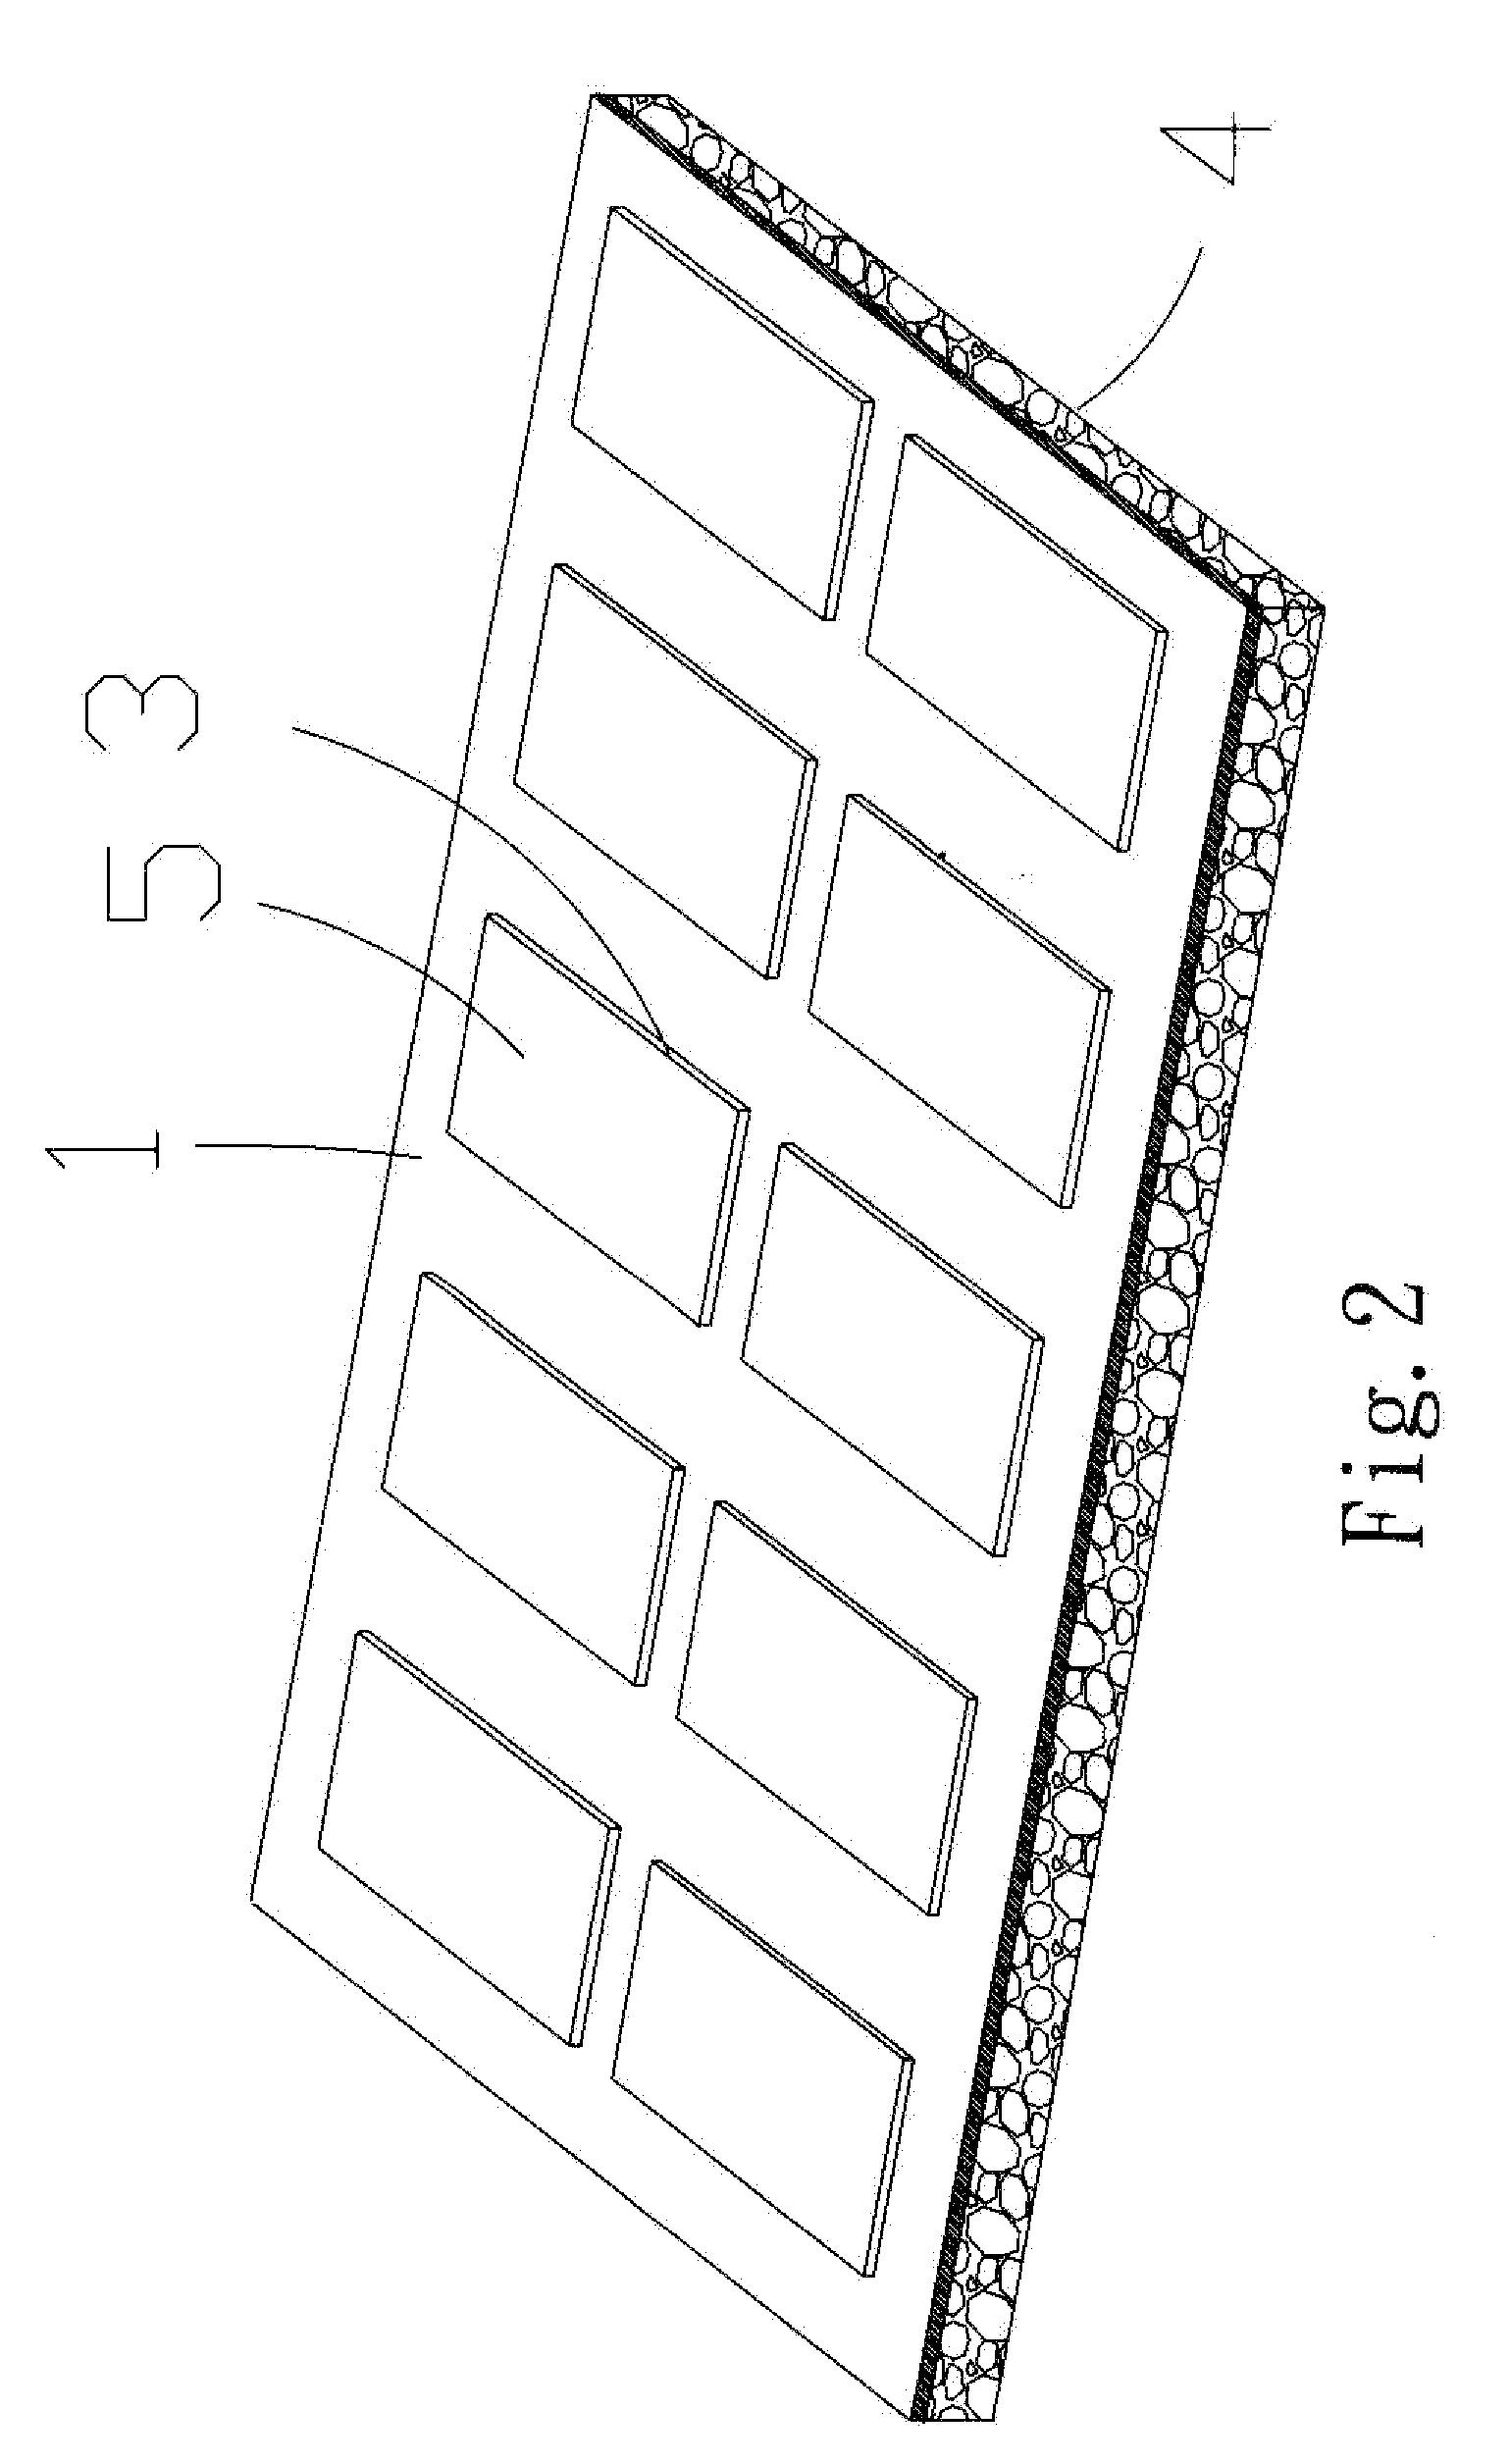 Construction material structure for use with solar power